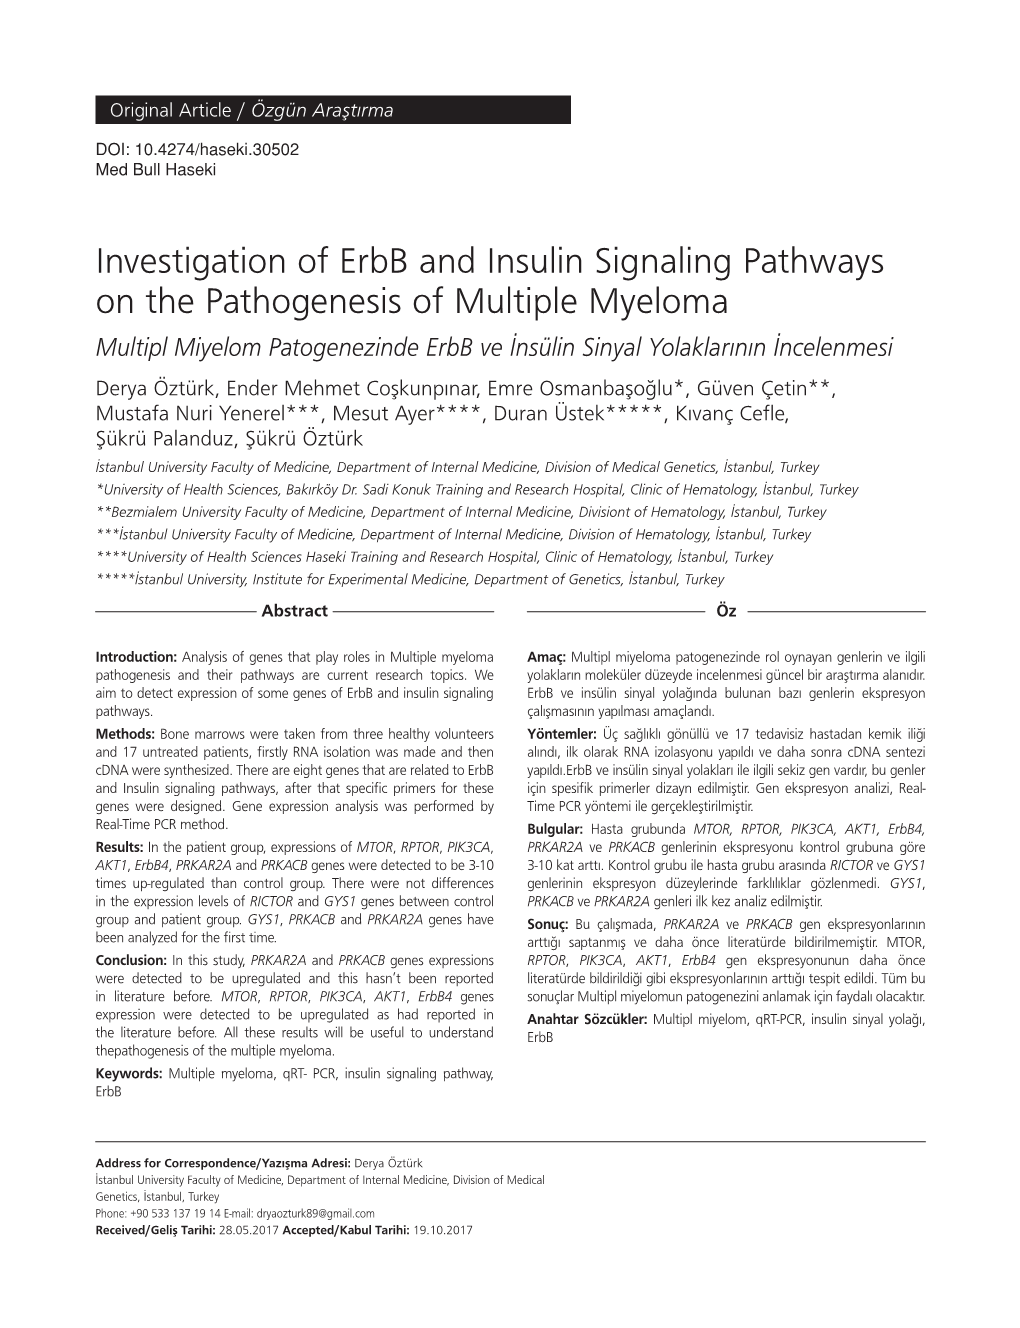 Investigation of Erbb and Insulin Signaling Pathways on The